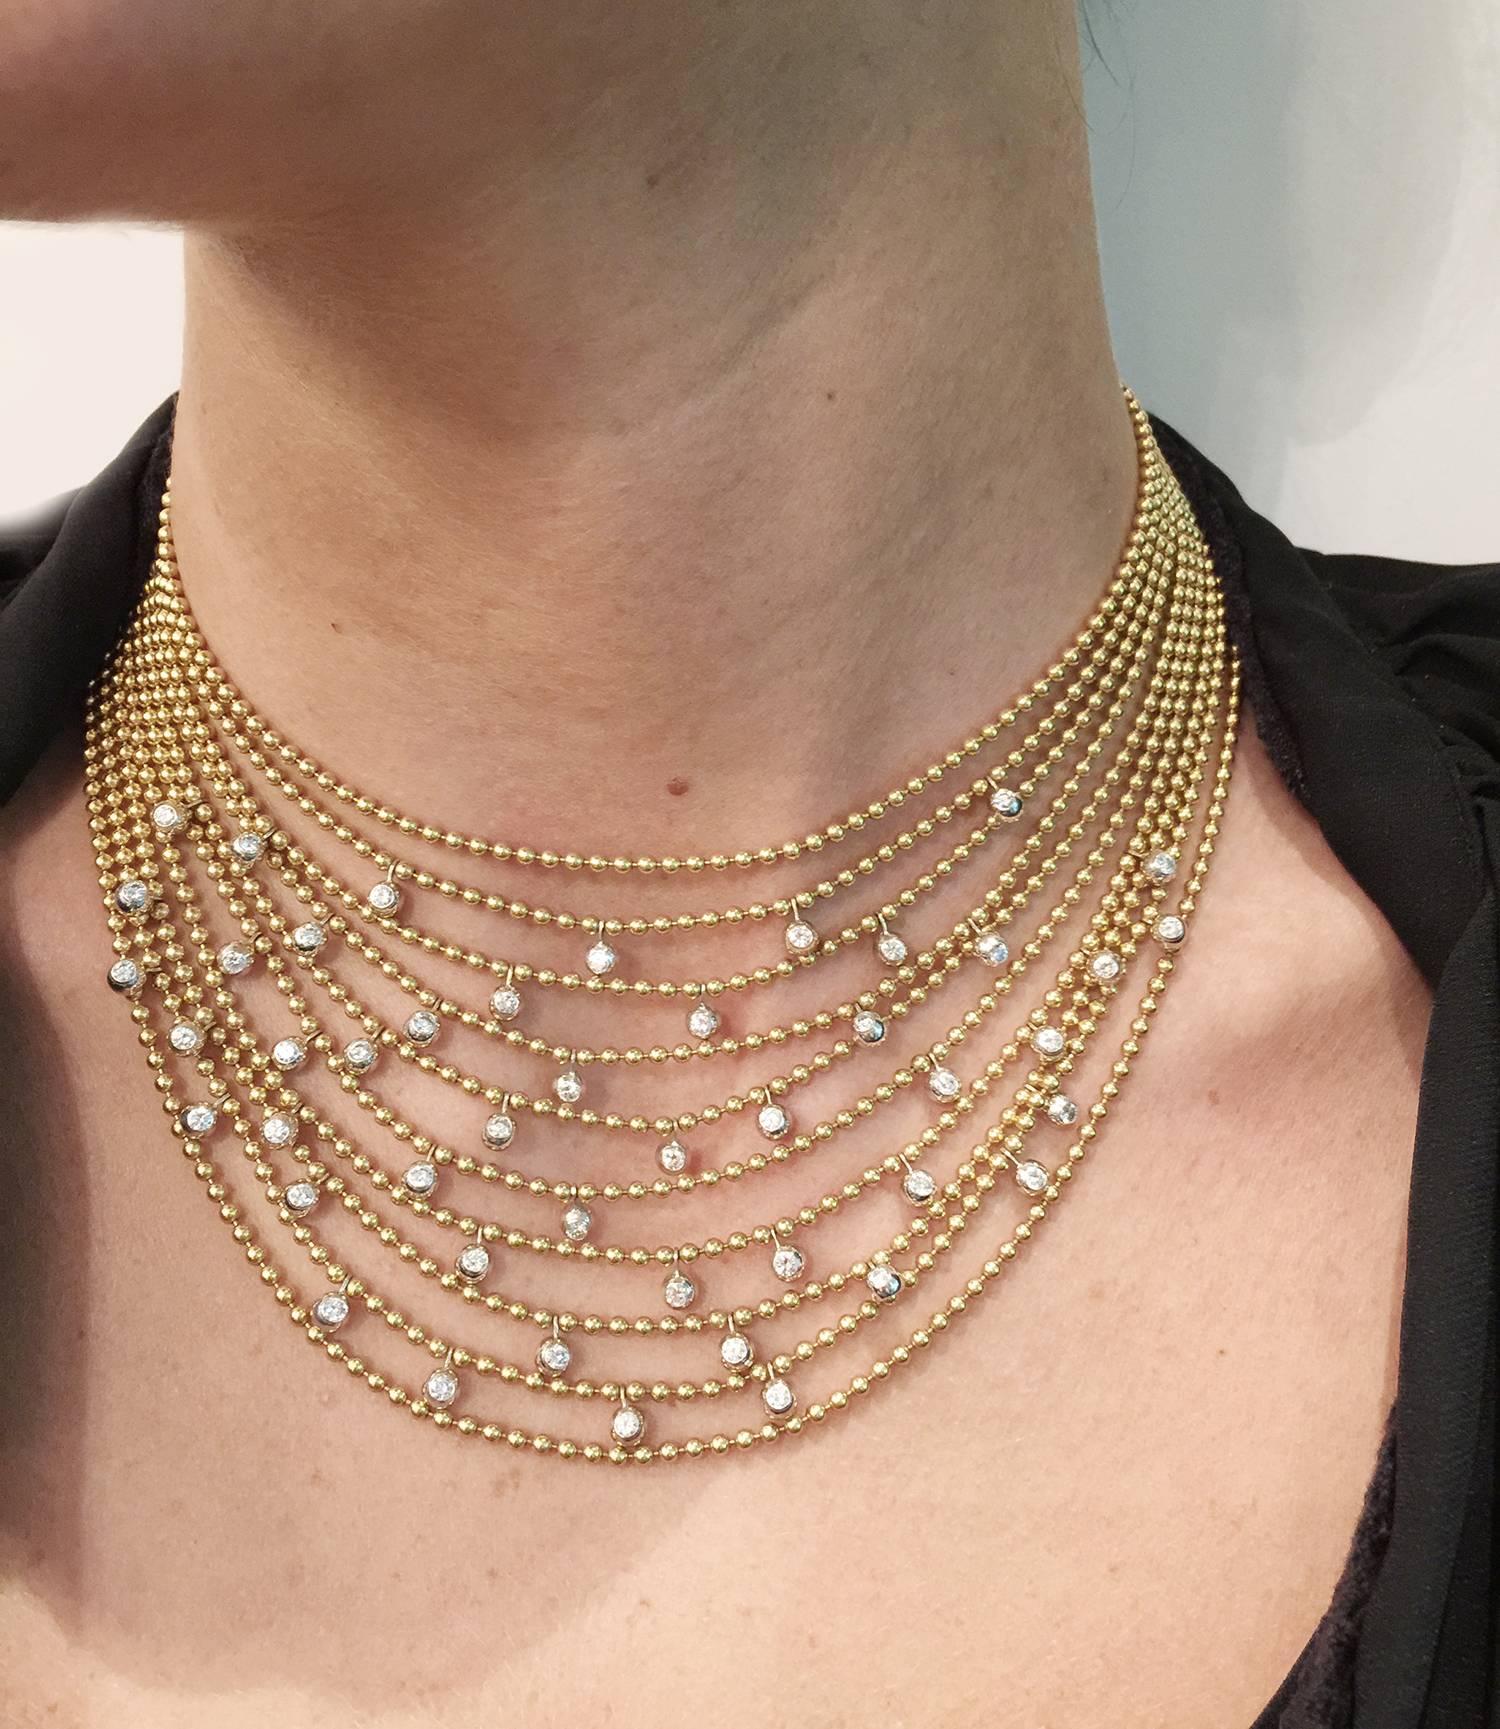 Yellow gold Cartier Drapery necklace set with 46 brilliants dispatched on 10 rows of bid chains.
Circa 1990.
Weight 117 grams
Inside diameter : 340 mm (short size)